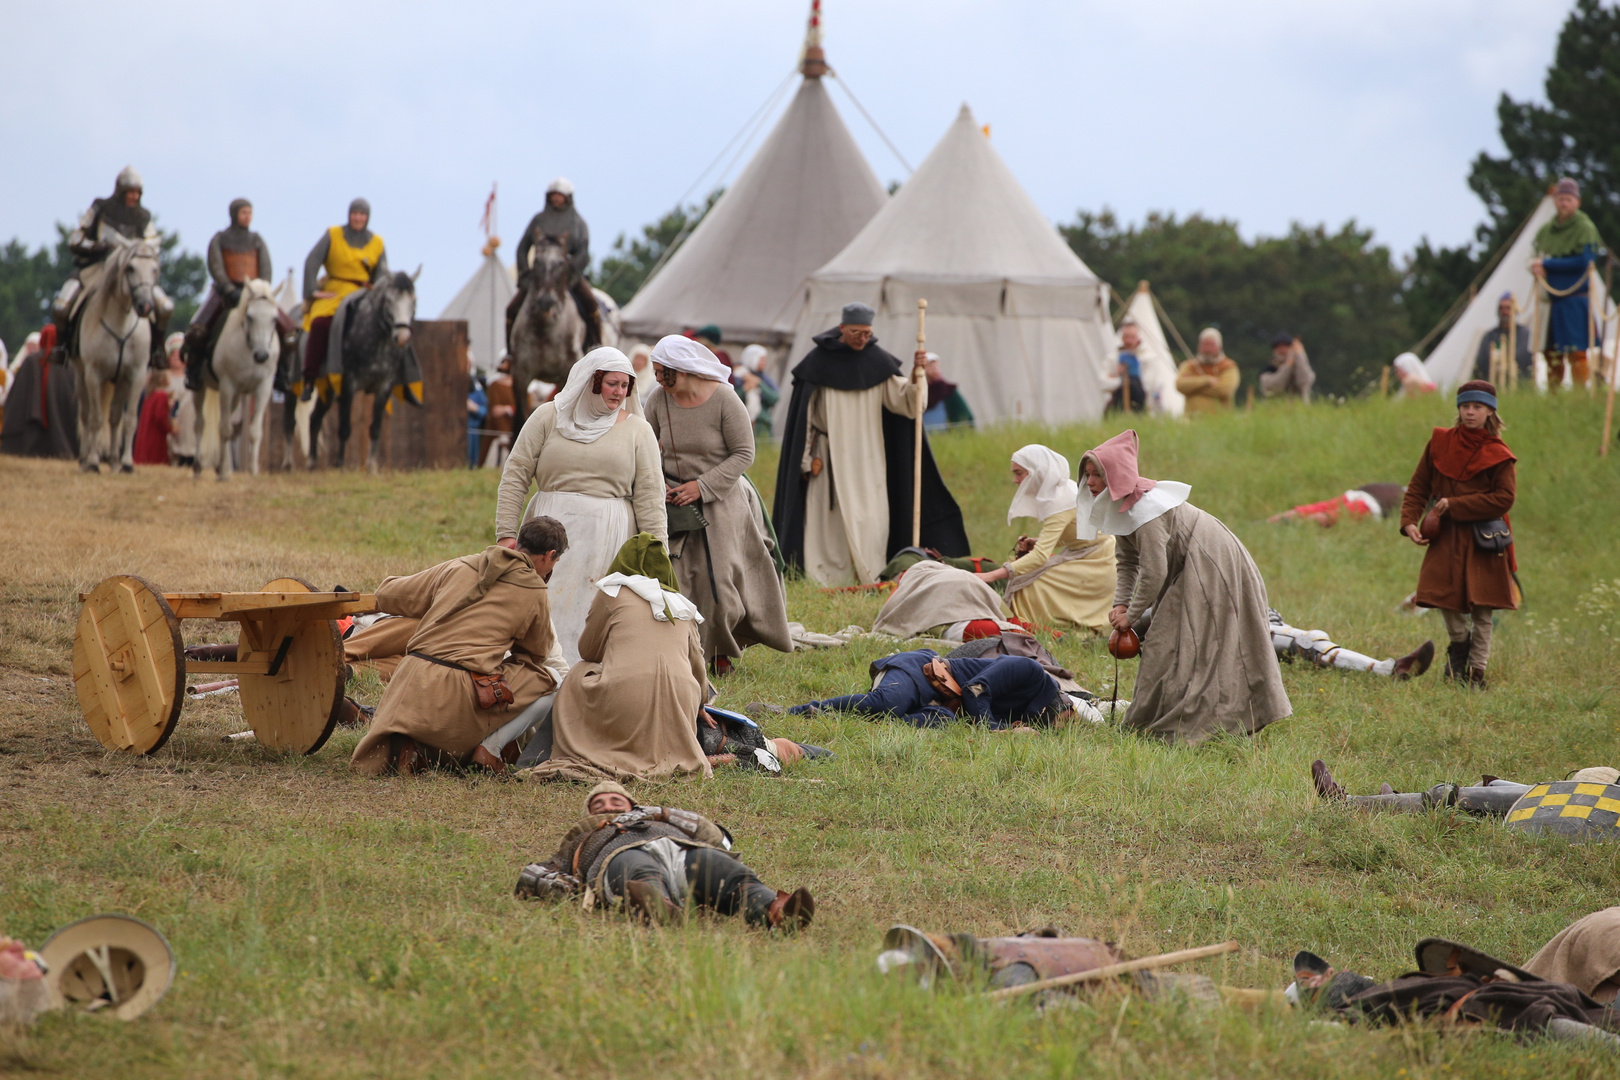 Battle of Visby (IV) 1361-2019